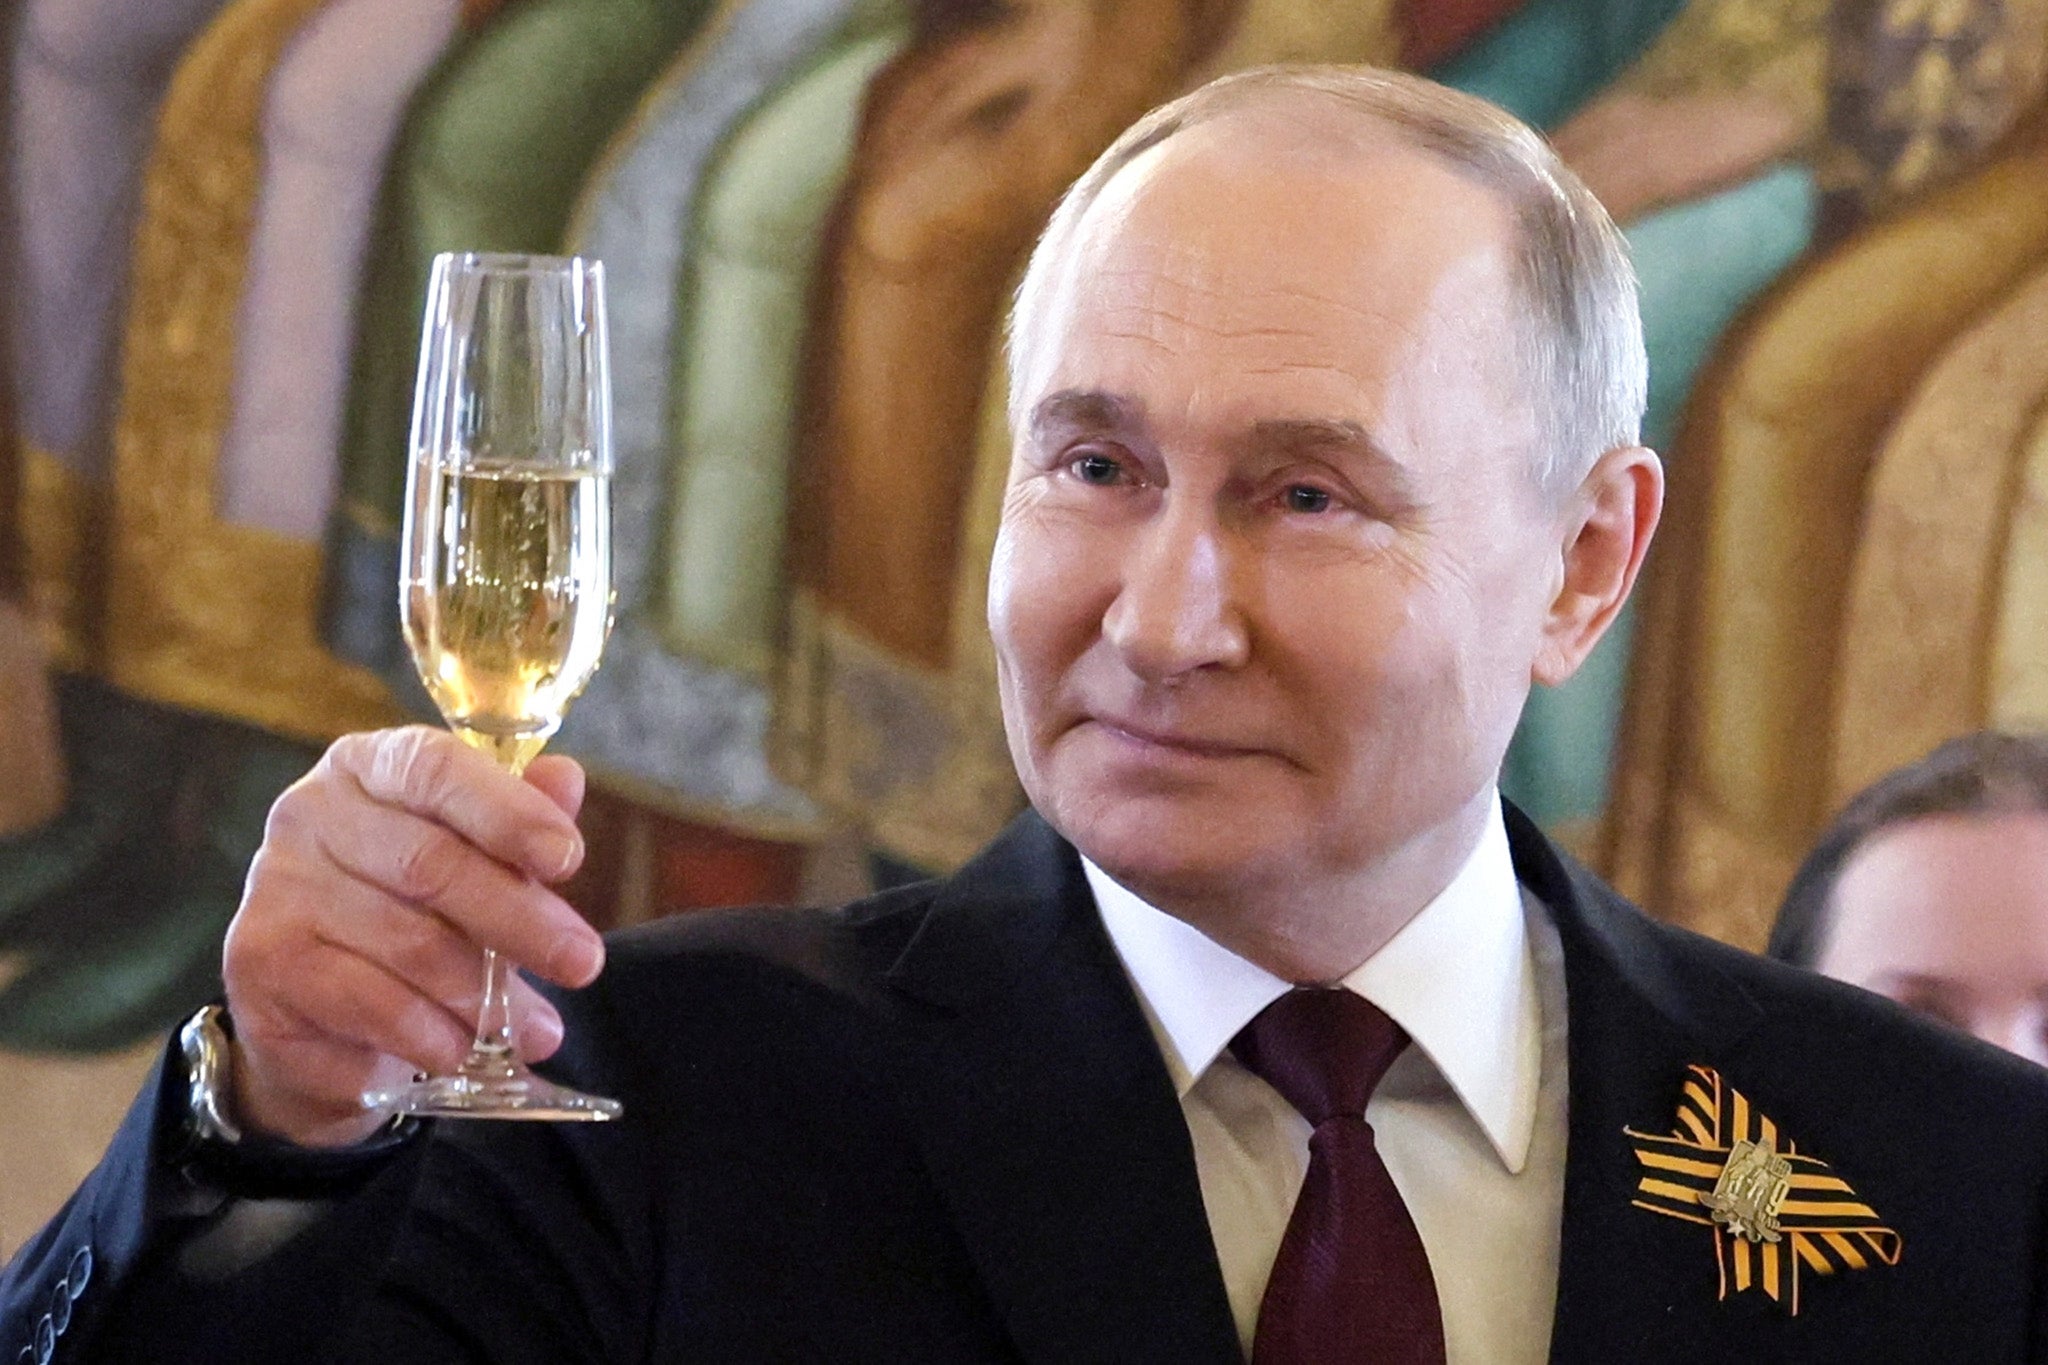 Putin raises a toast during a ceremony following the parade